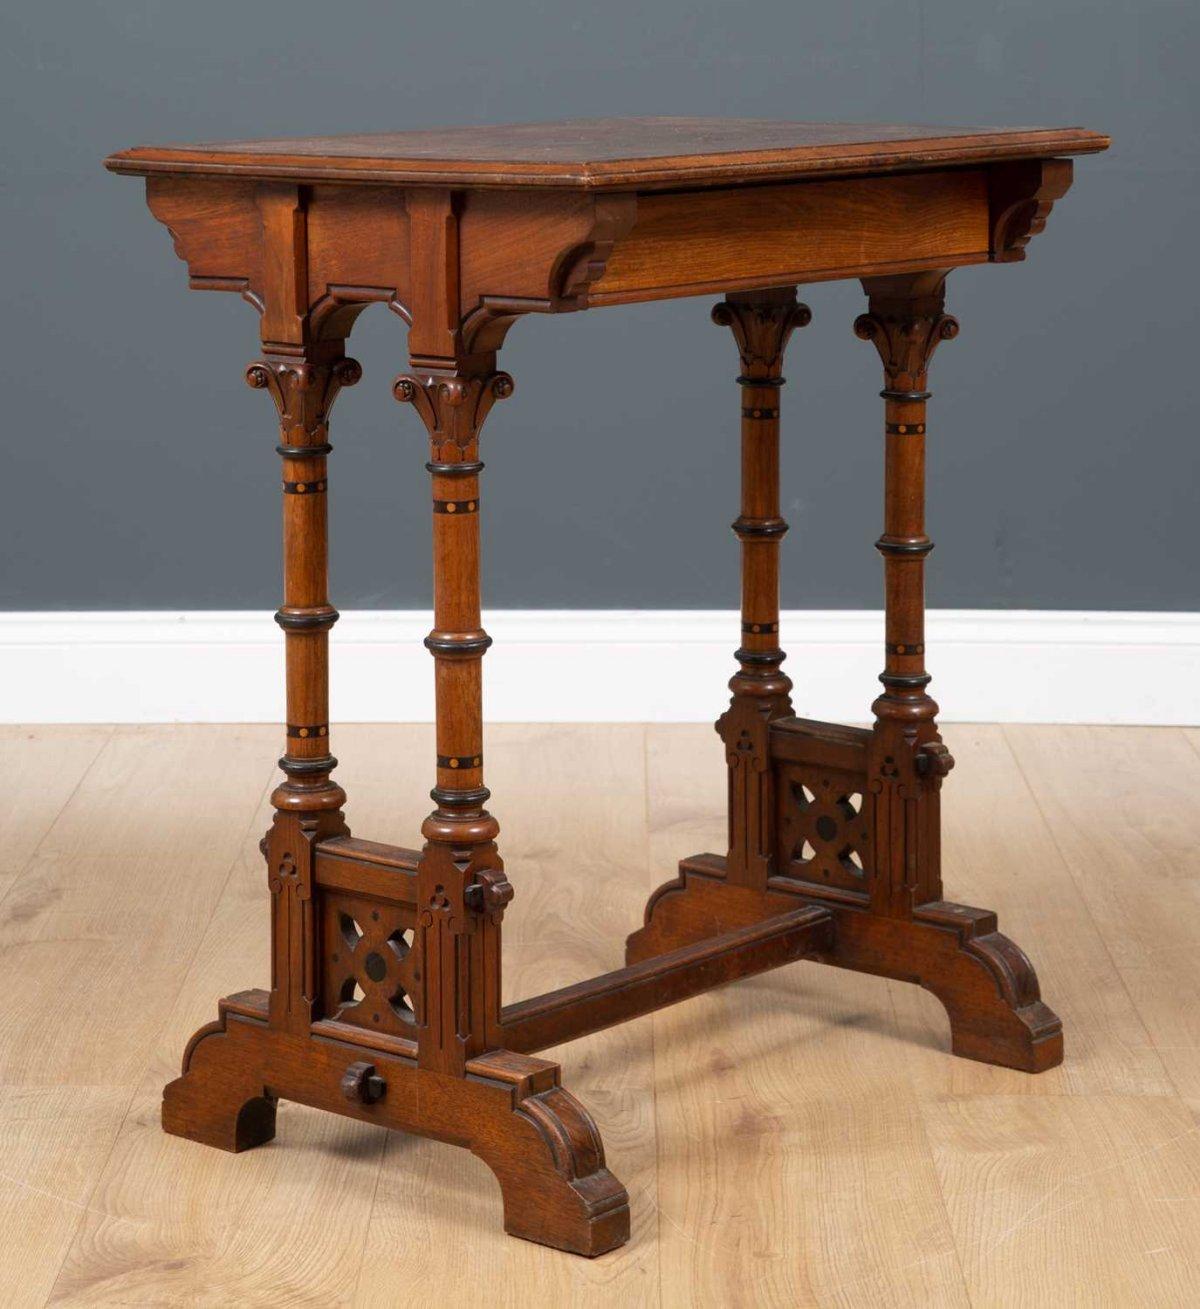 Charles Bevan. Probably made by Gillows of Lancaster. 
A small good quality Walnut Writing Table with a molded edge and a Burr Walnut top surrounded by an ebonized line detail with dot details to each corner with a single drawer below. The turned